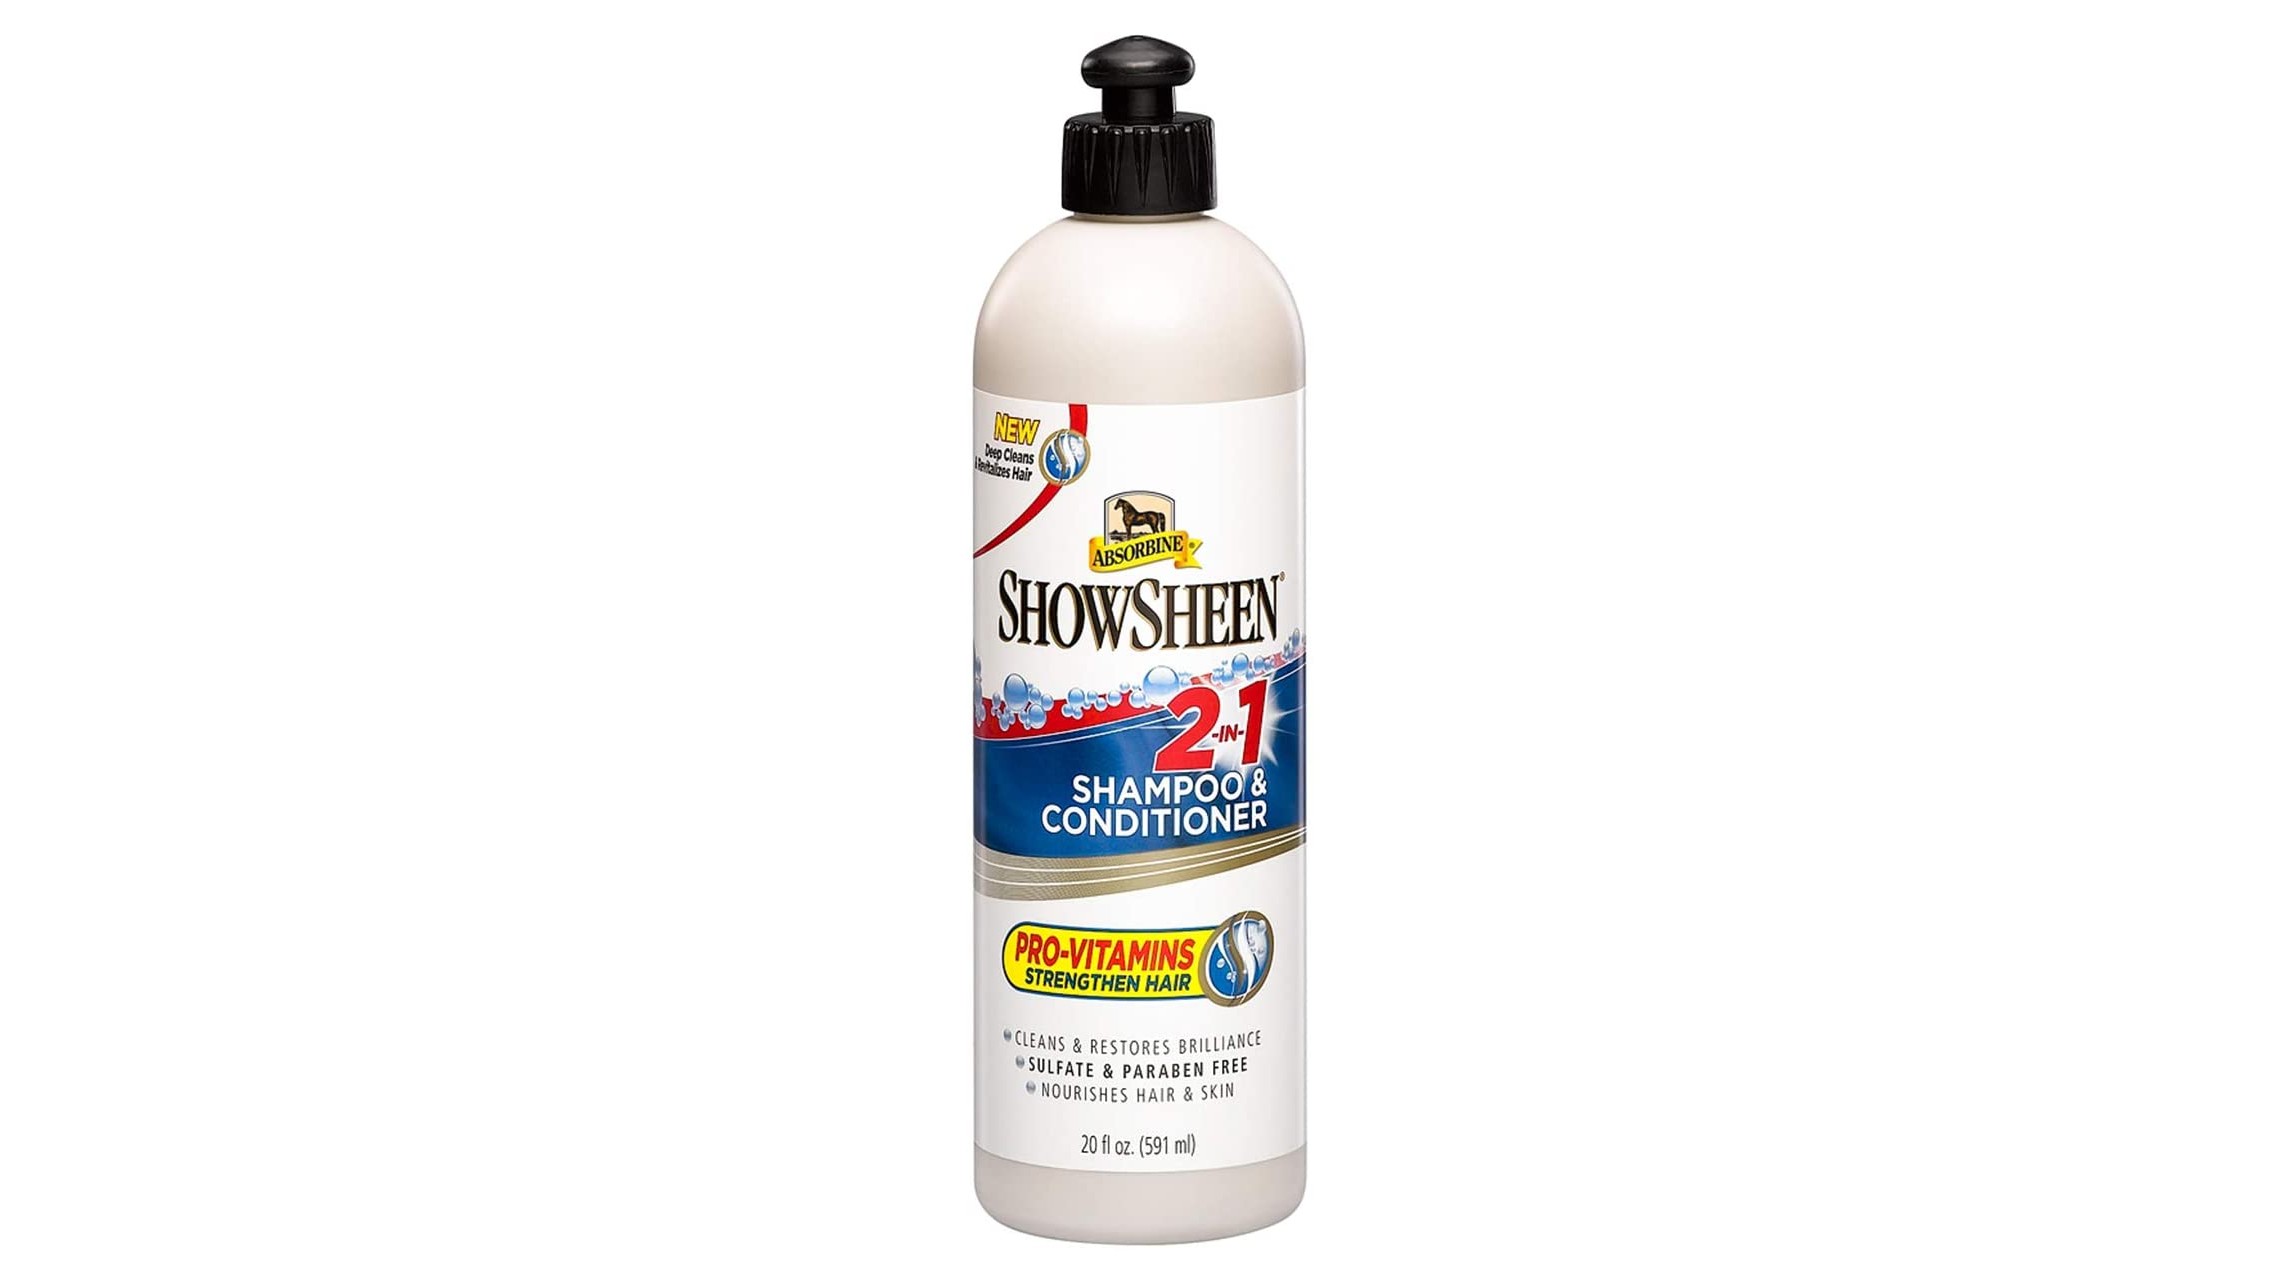 Absorbine ShowSheen 2-in1 horse shampoo and conditioner